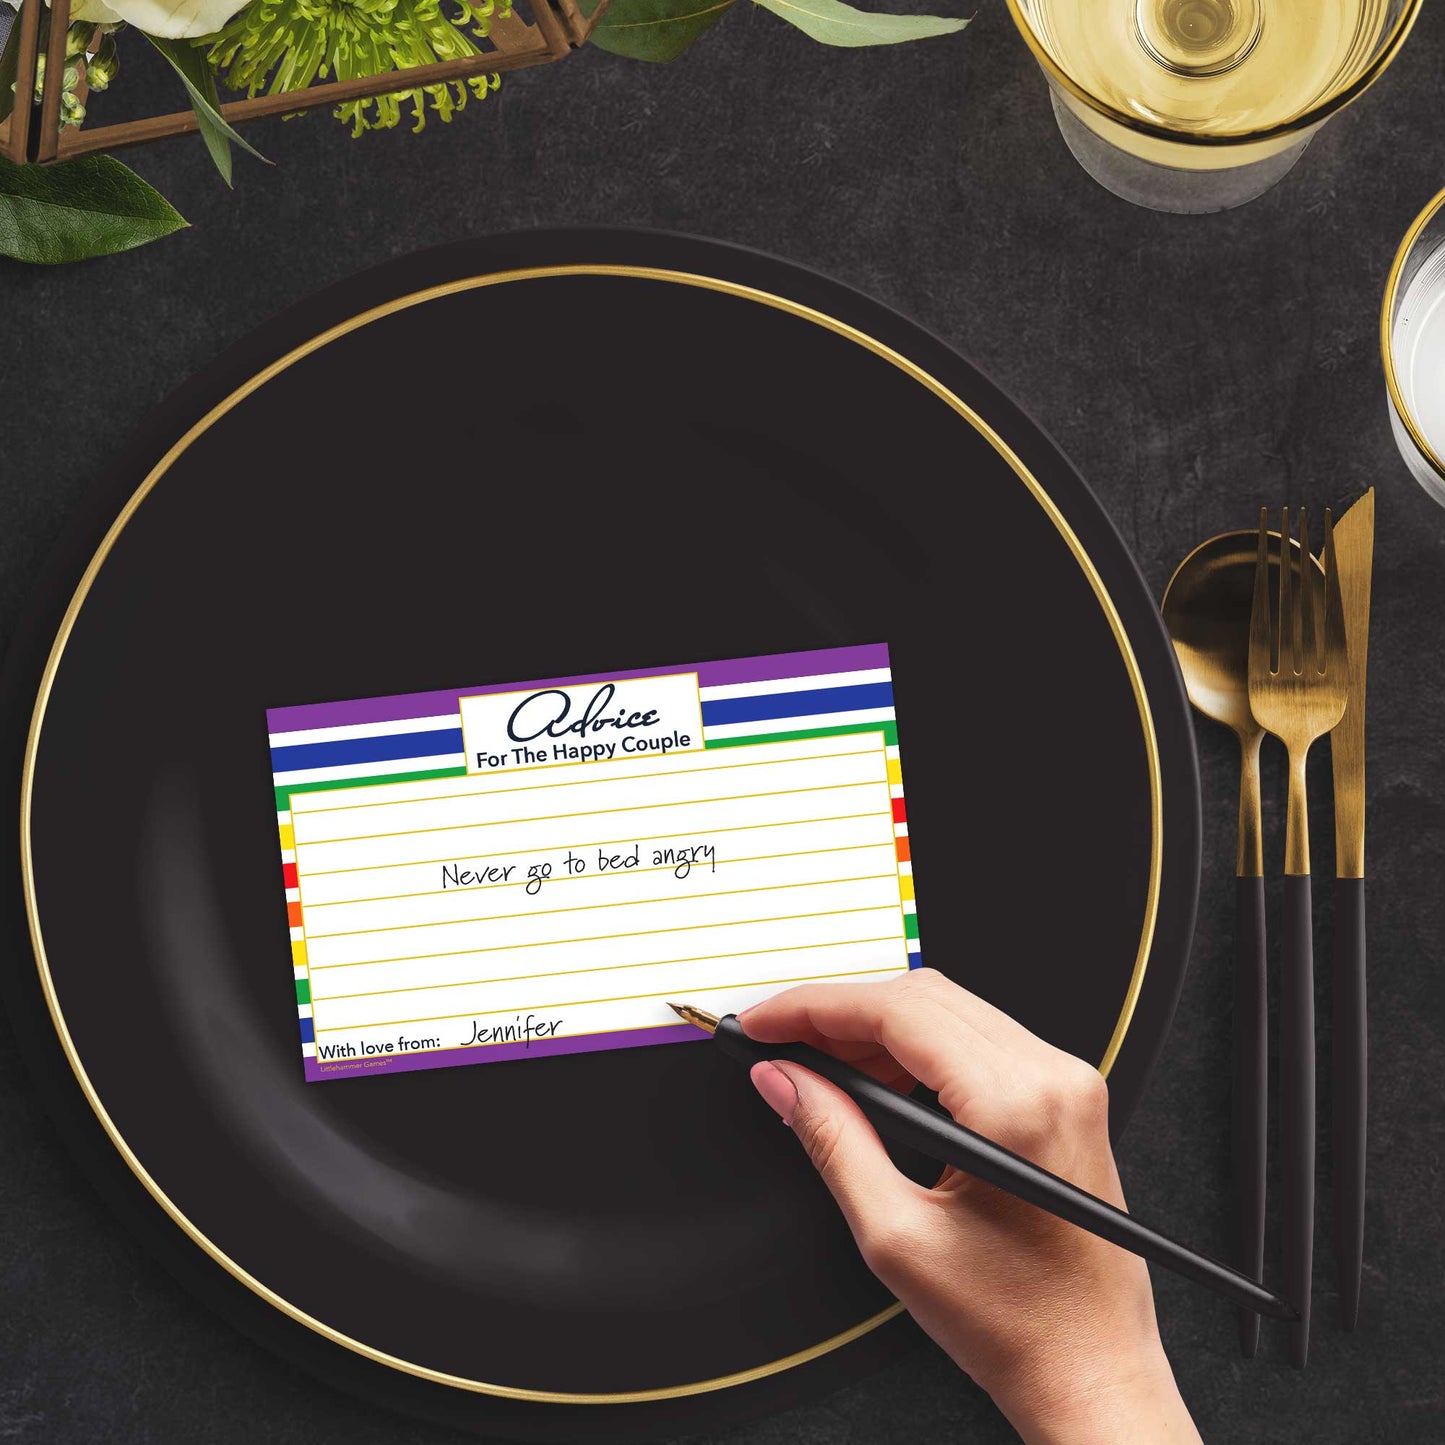 Woman with a pen sitting at a dark place setting with a black and gold plate filling out a rainbow-striped Advice for the Happy Couple card